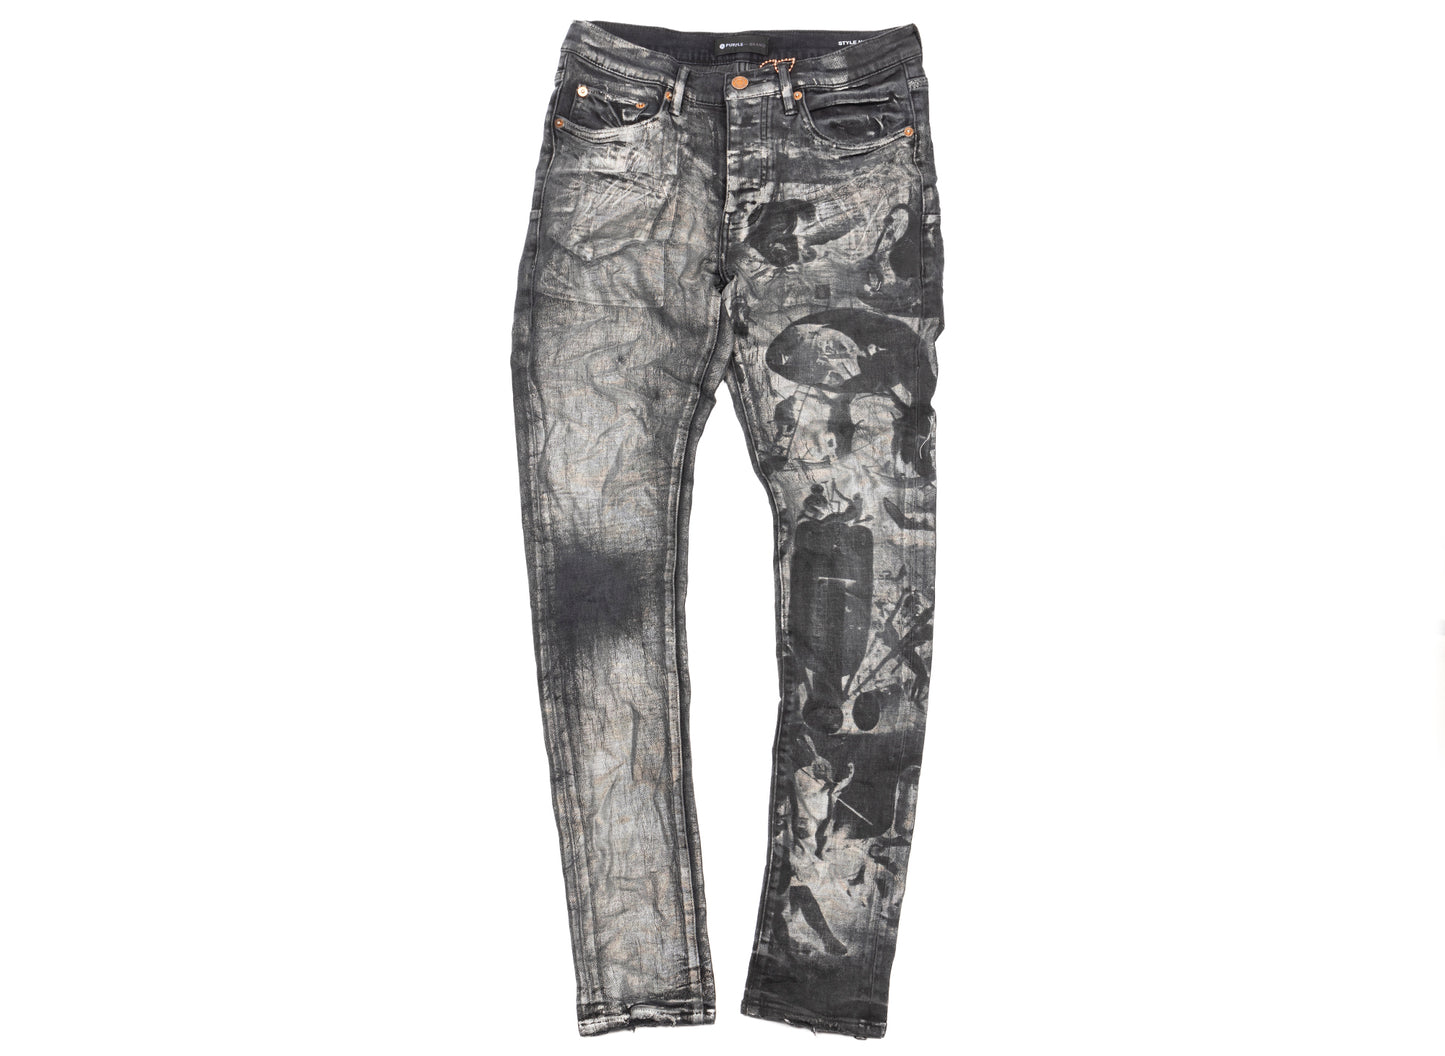 Purple Brand Aged Black Washed Jeans